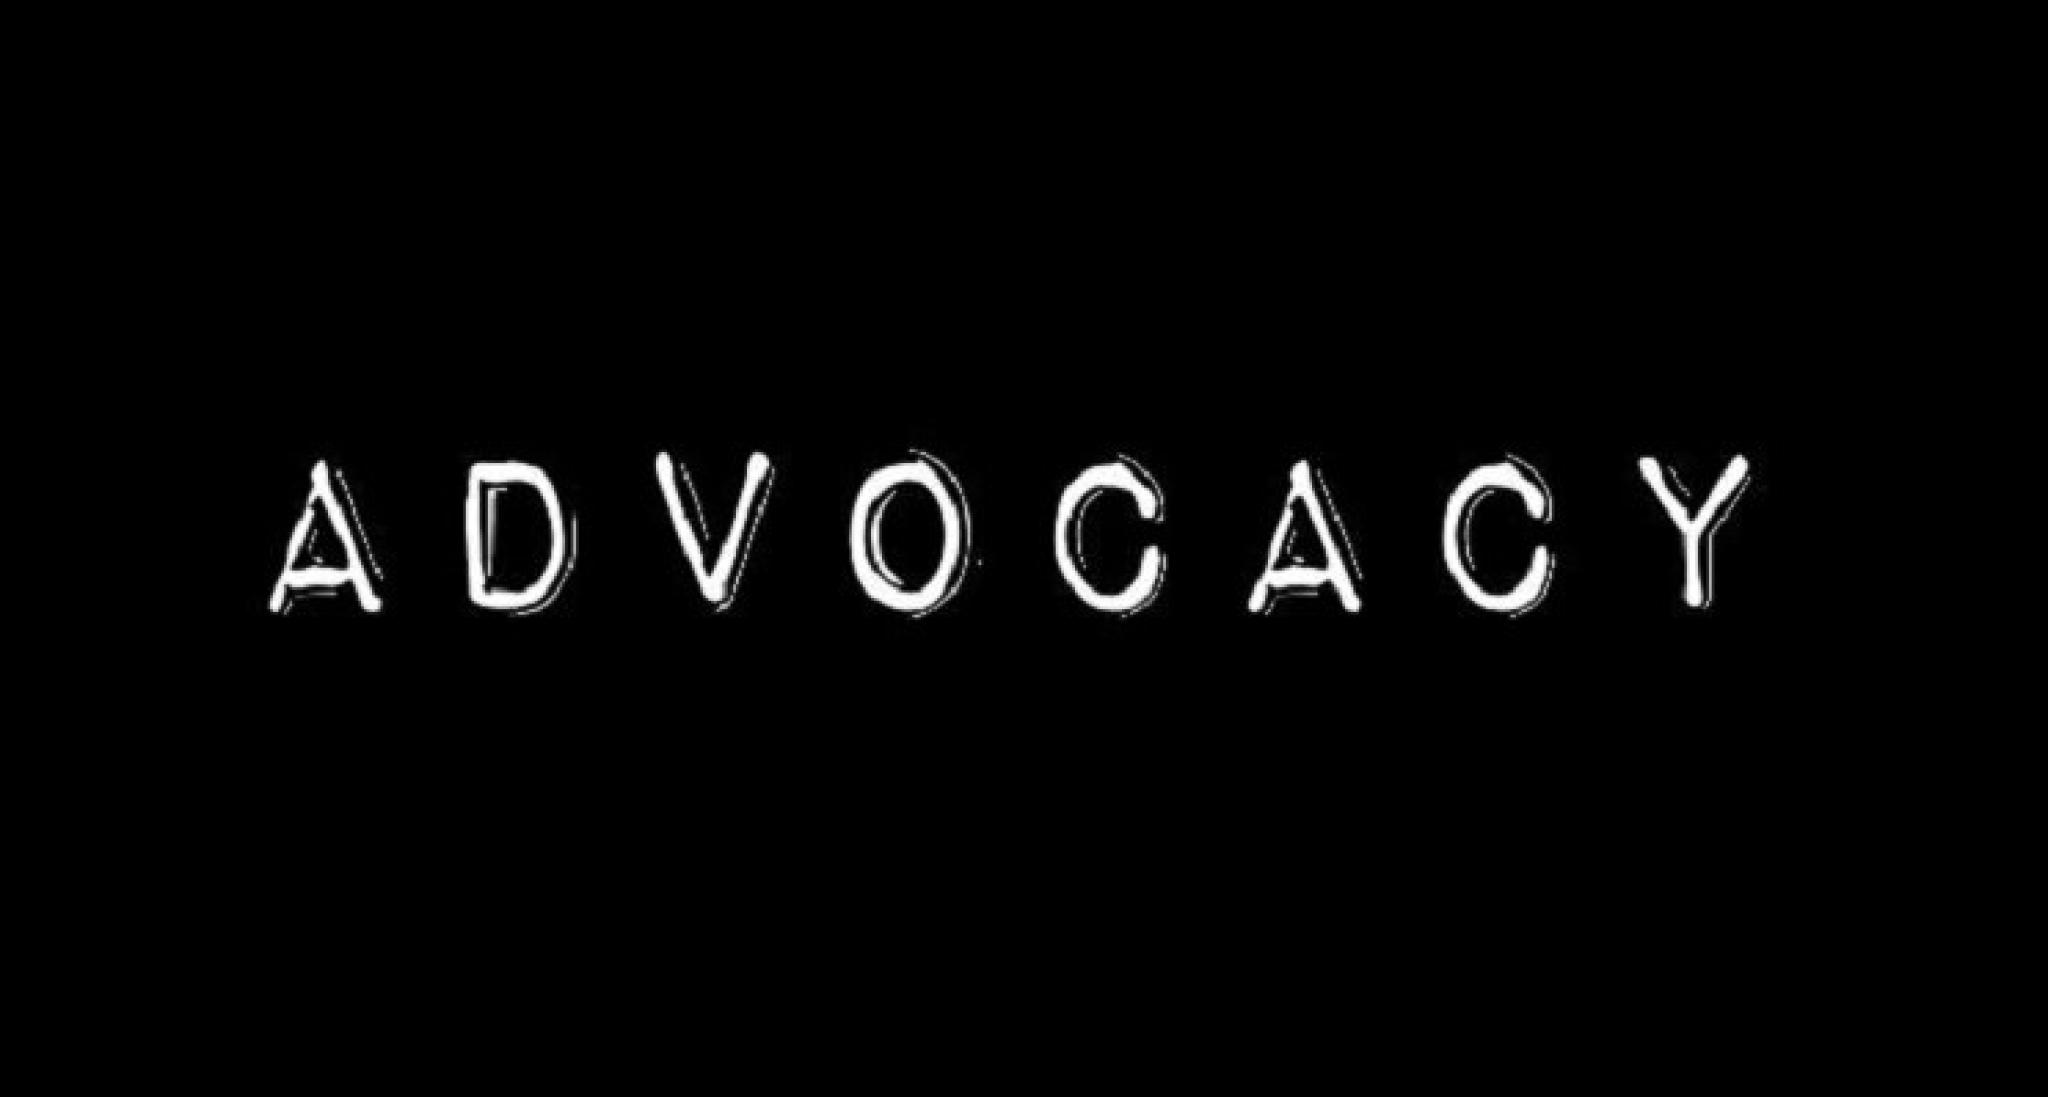 Word 'advocacy' written in white against black background